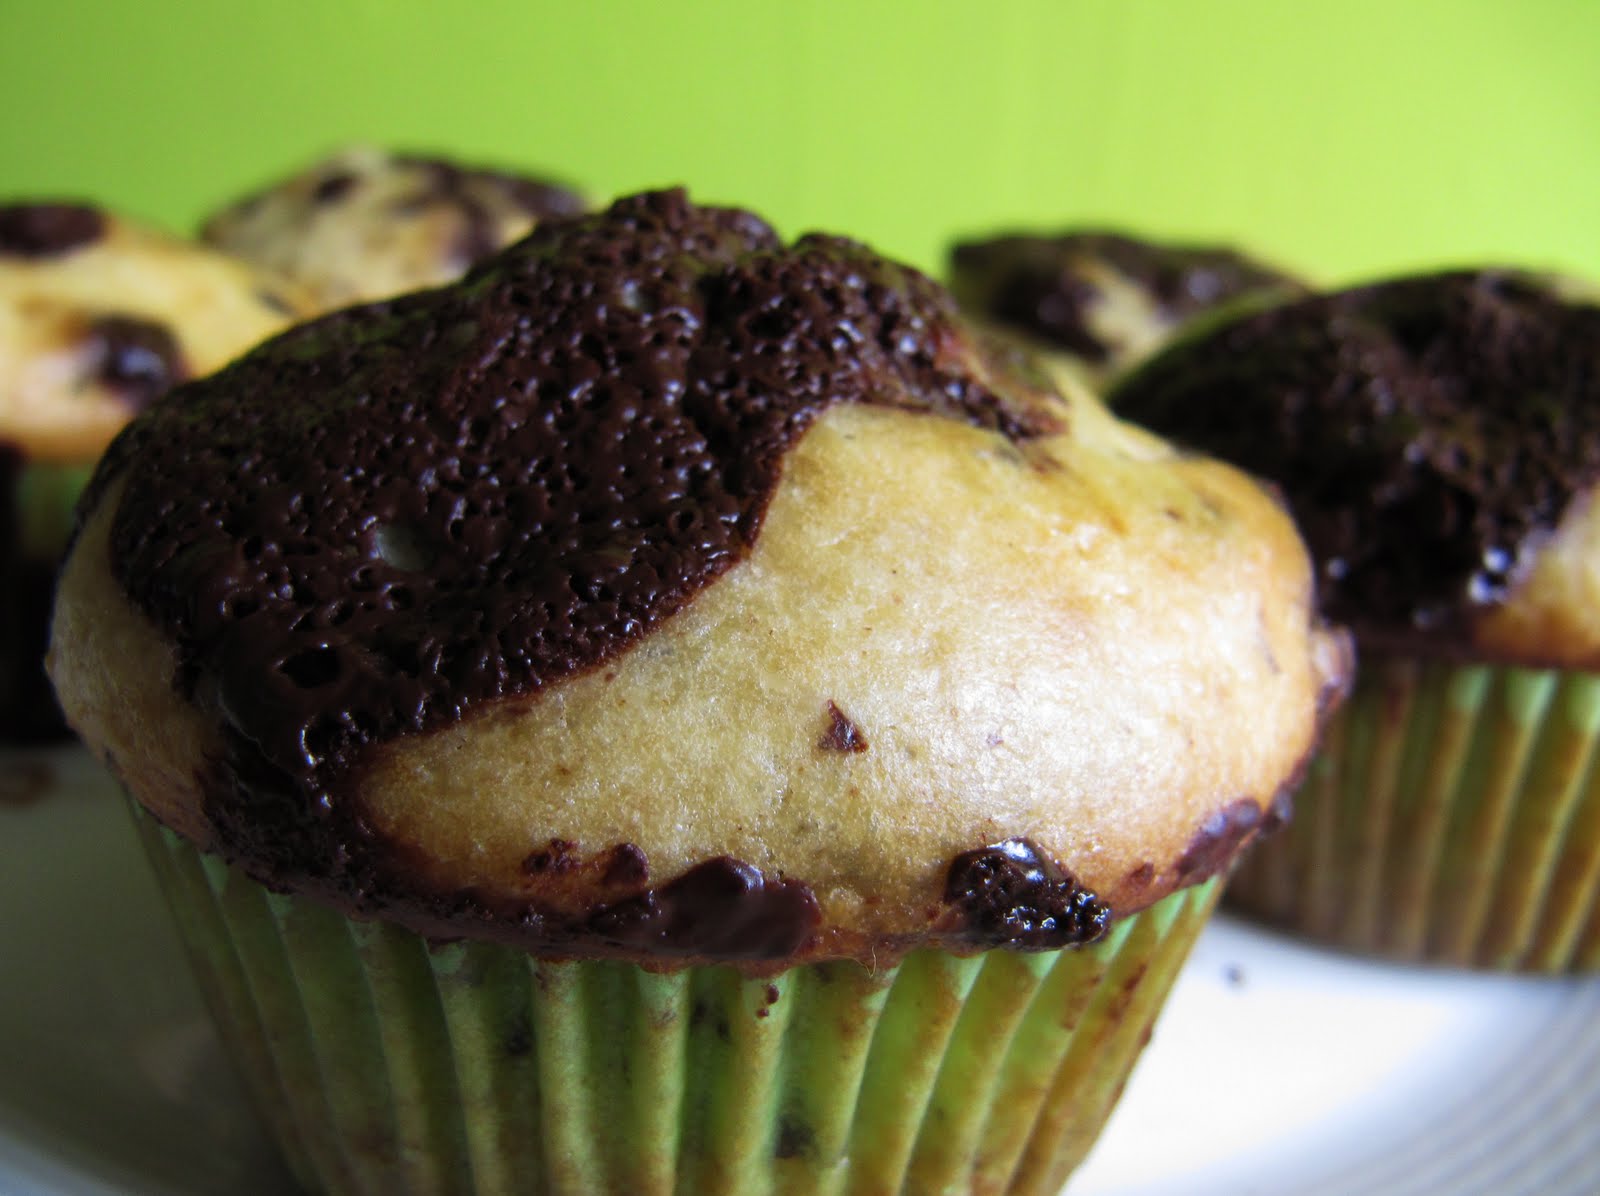 Me and Baking: Vanille muffins met chocolade